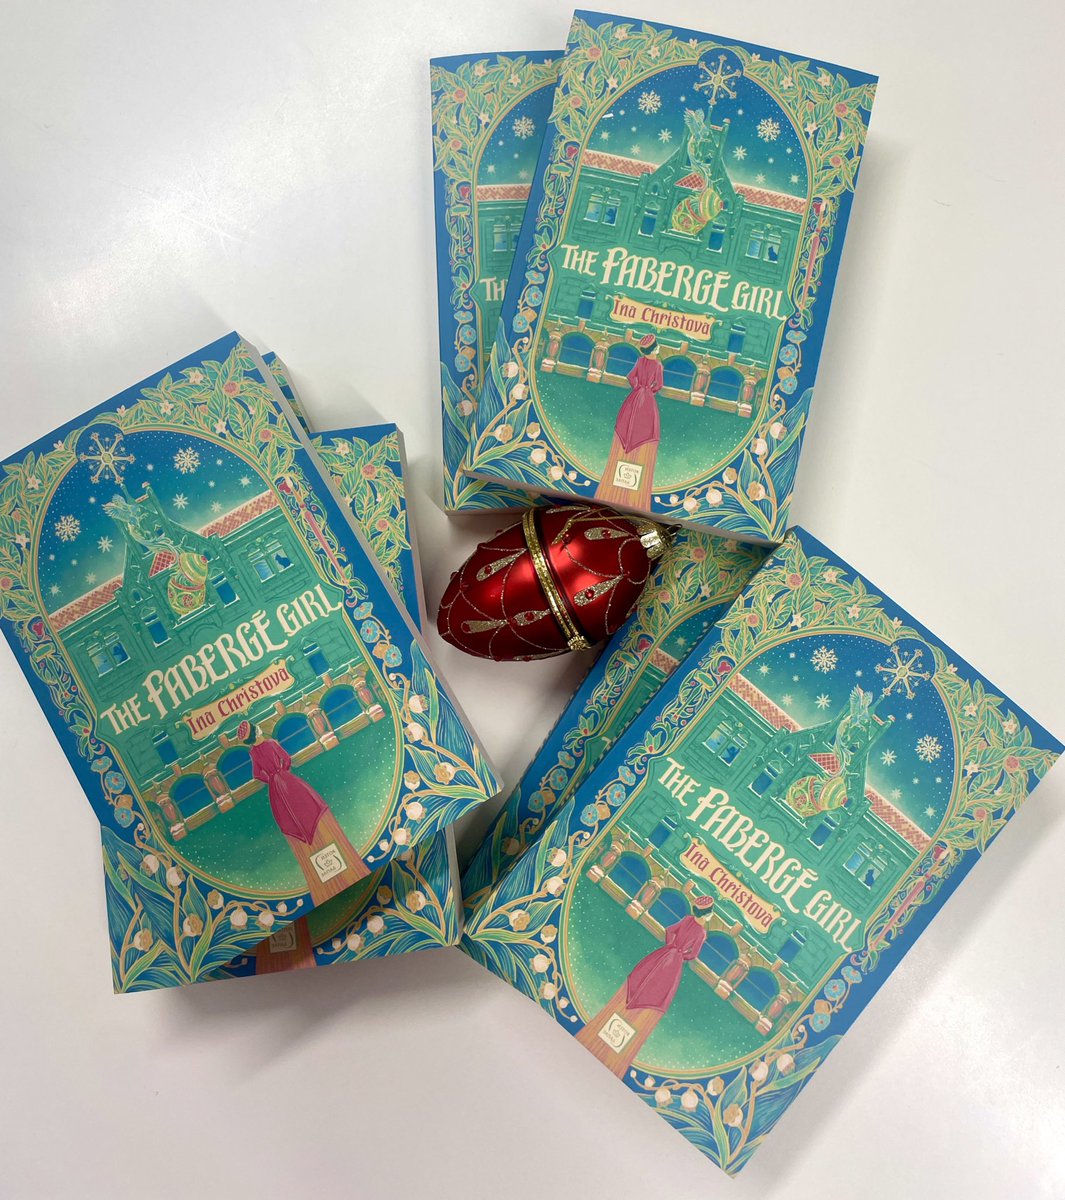 Thank you @Ina_Christova for coming by the FMcM offices and giving us these beautiful copies of #TheFabergeGirl - and a Fabergé egg! ✨✨